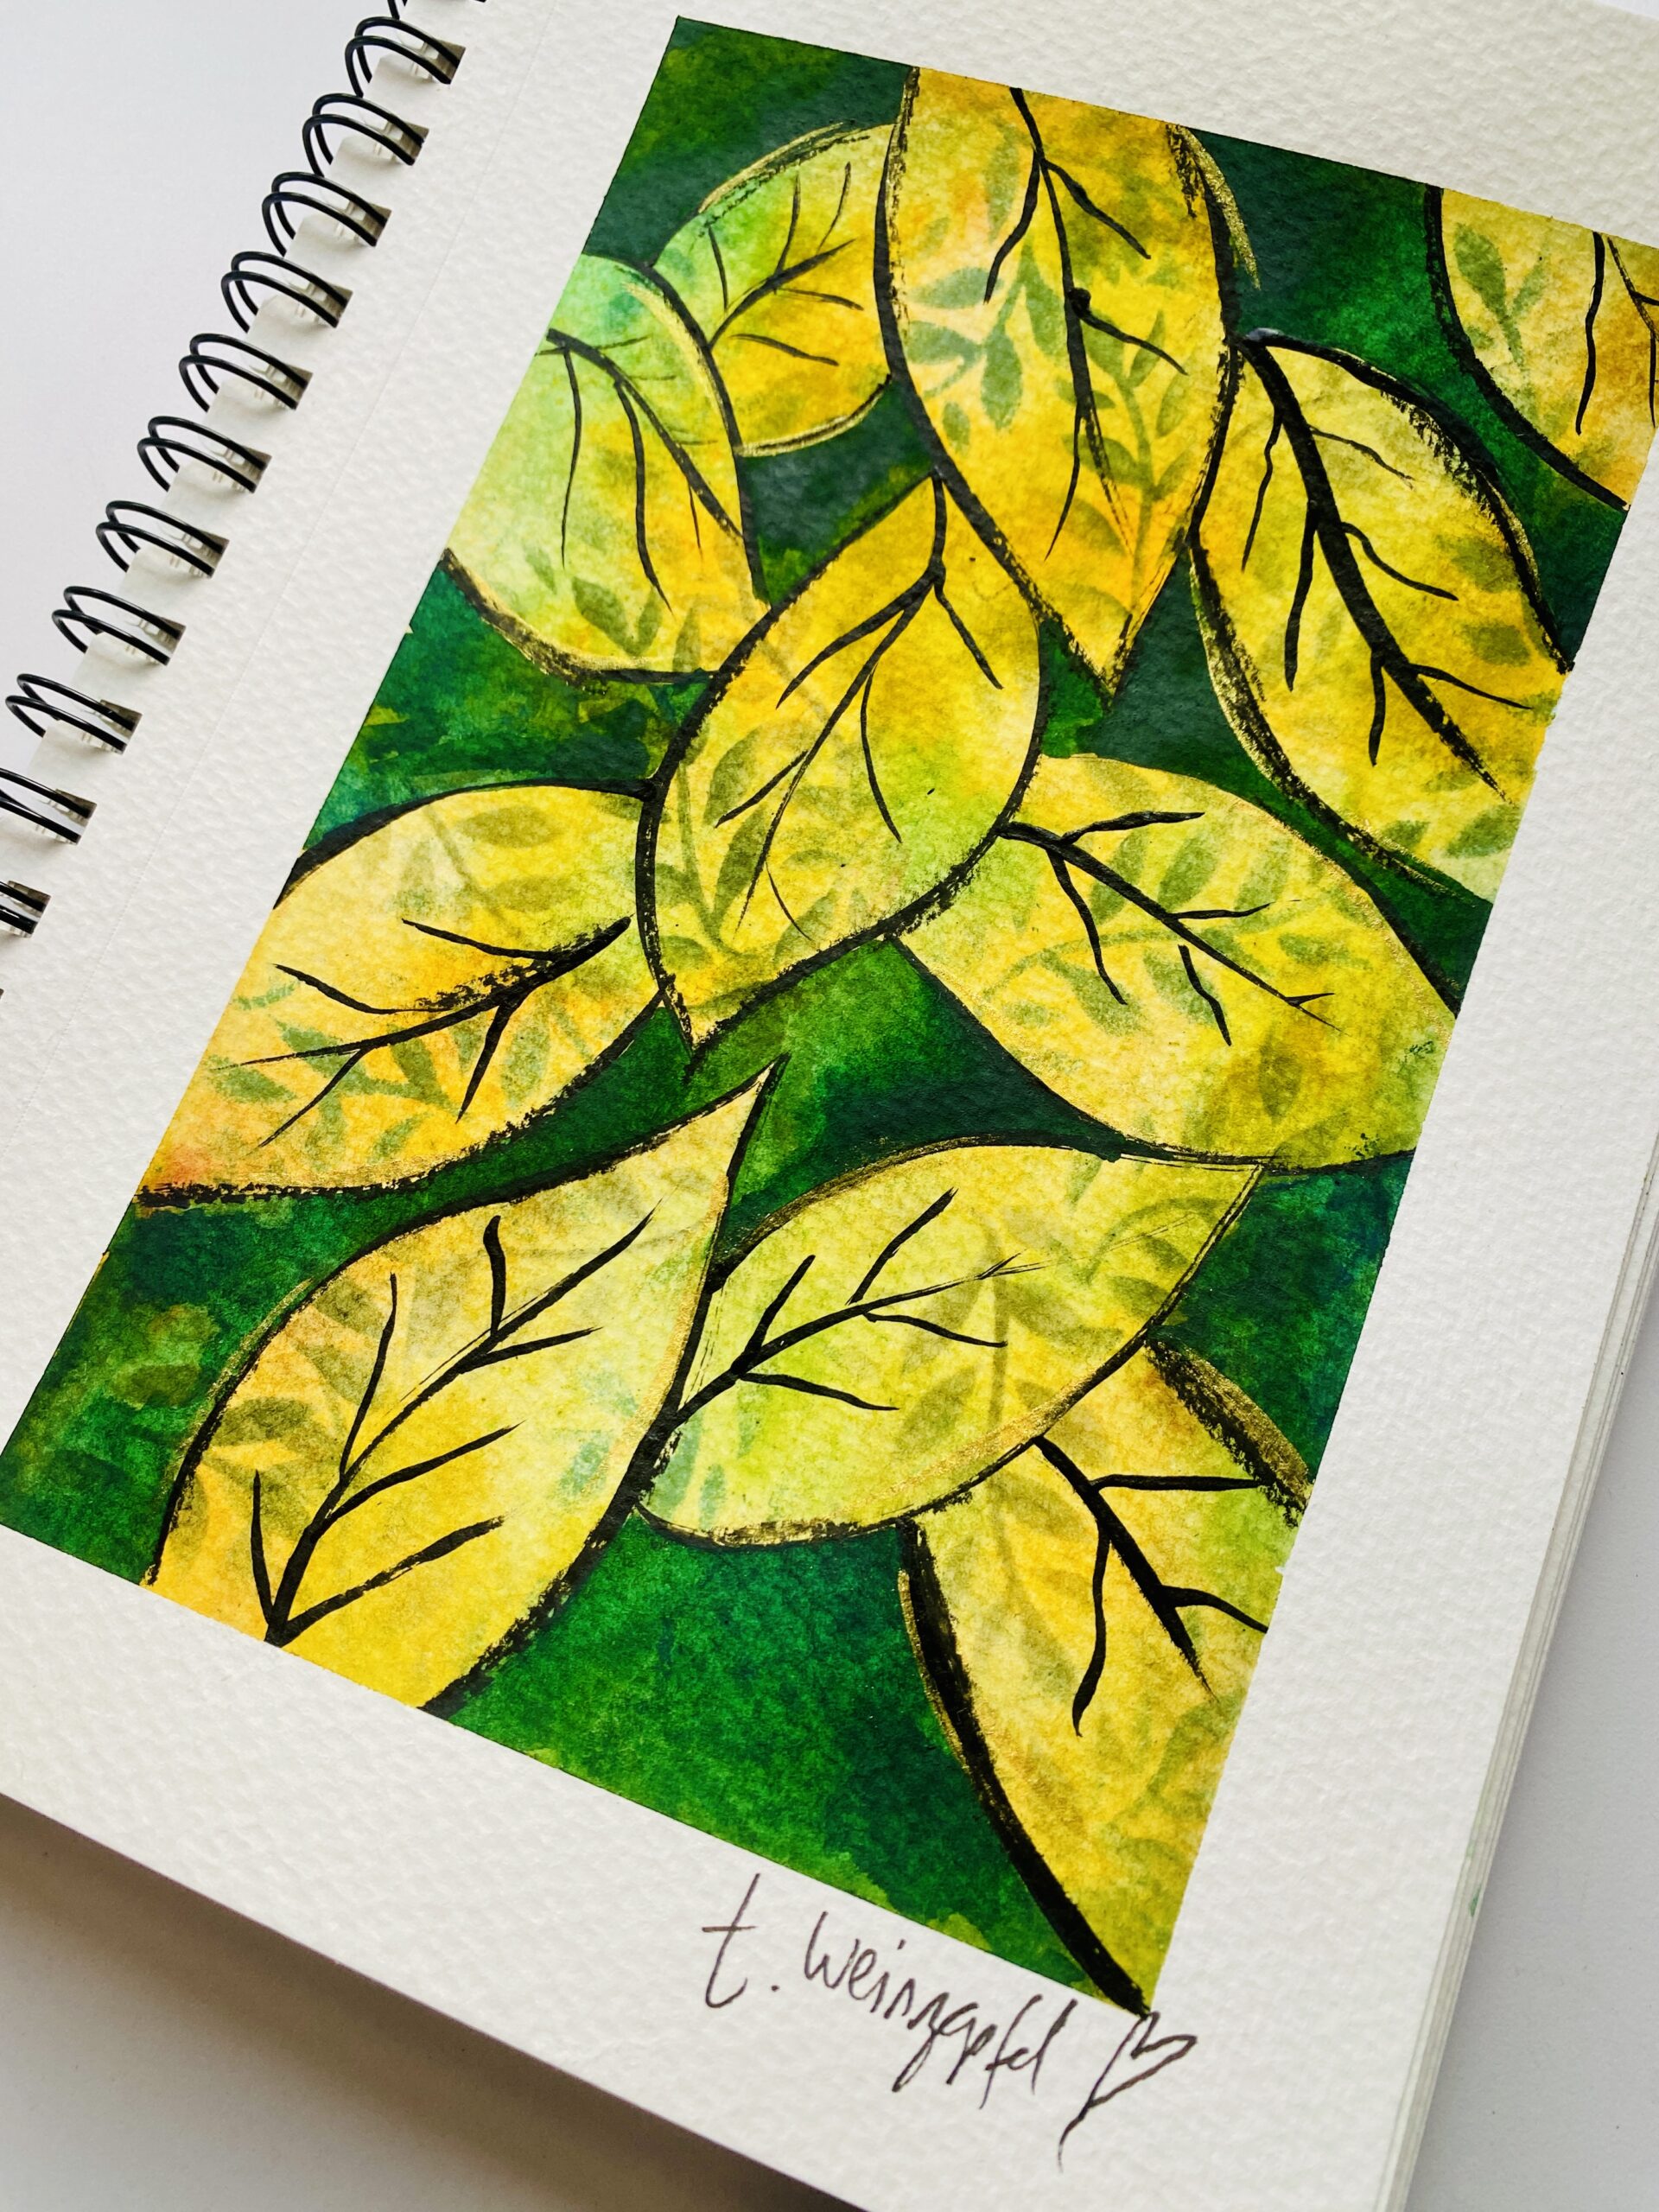 finished leaf watercolor painting